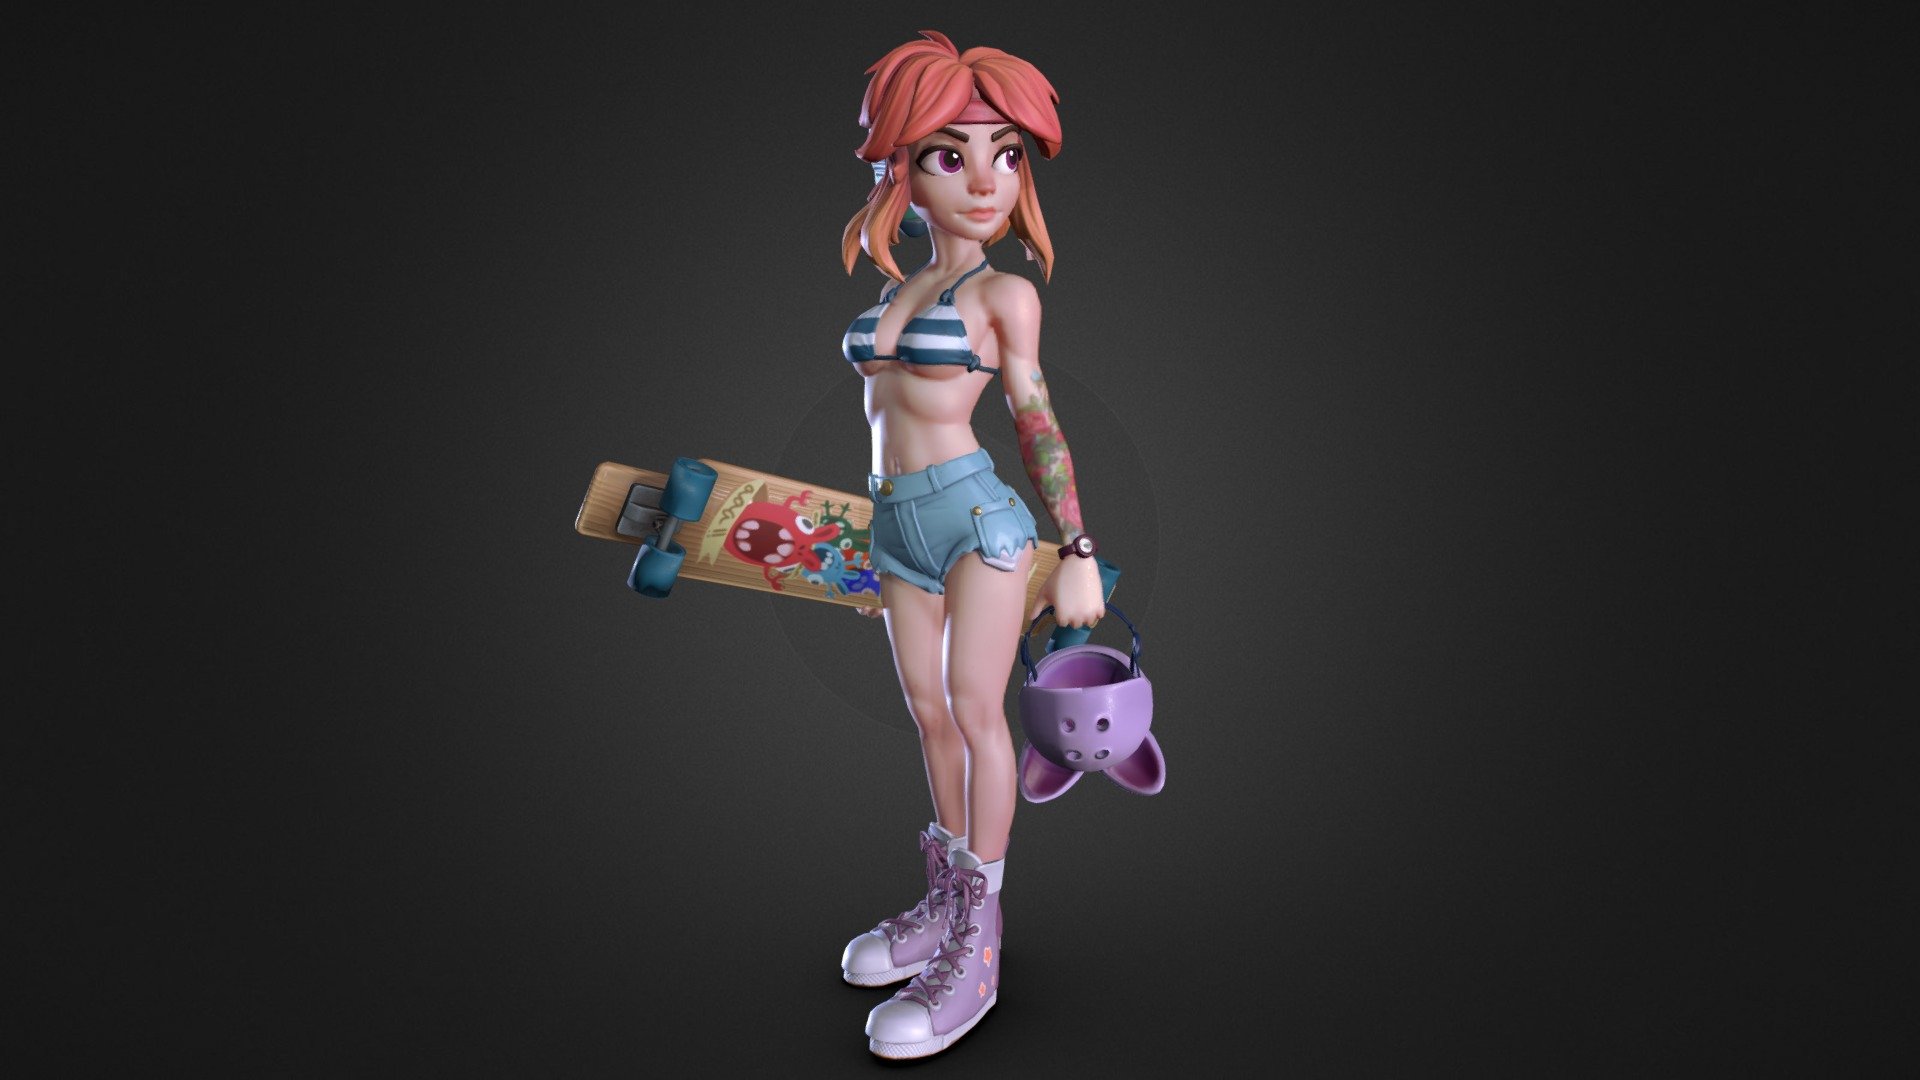 Based on a concept by DonWoka!
https://www.instagram.com/p/CVivMeBP63U/

My first rig using Blender's rigify. Modeled in Blender/ZBrush, baked in Marmoset, textured in Painter 3d model